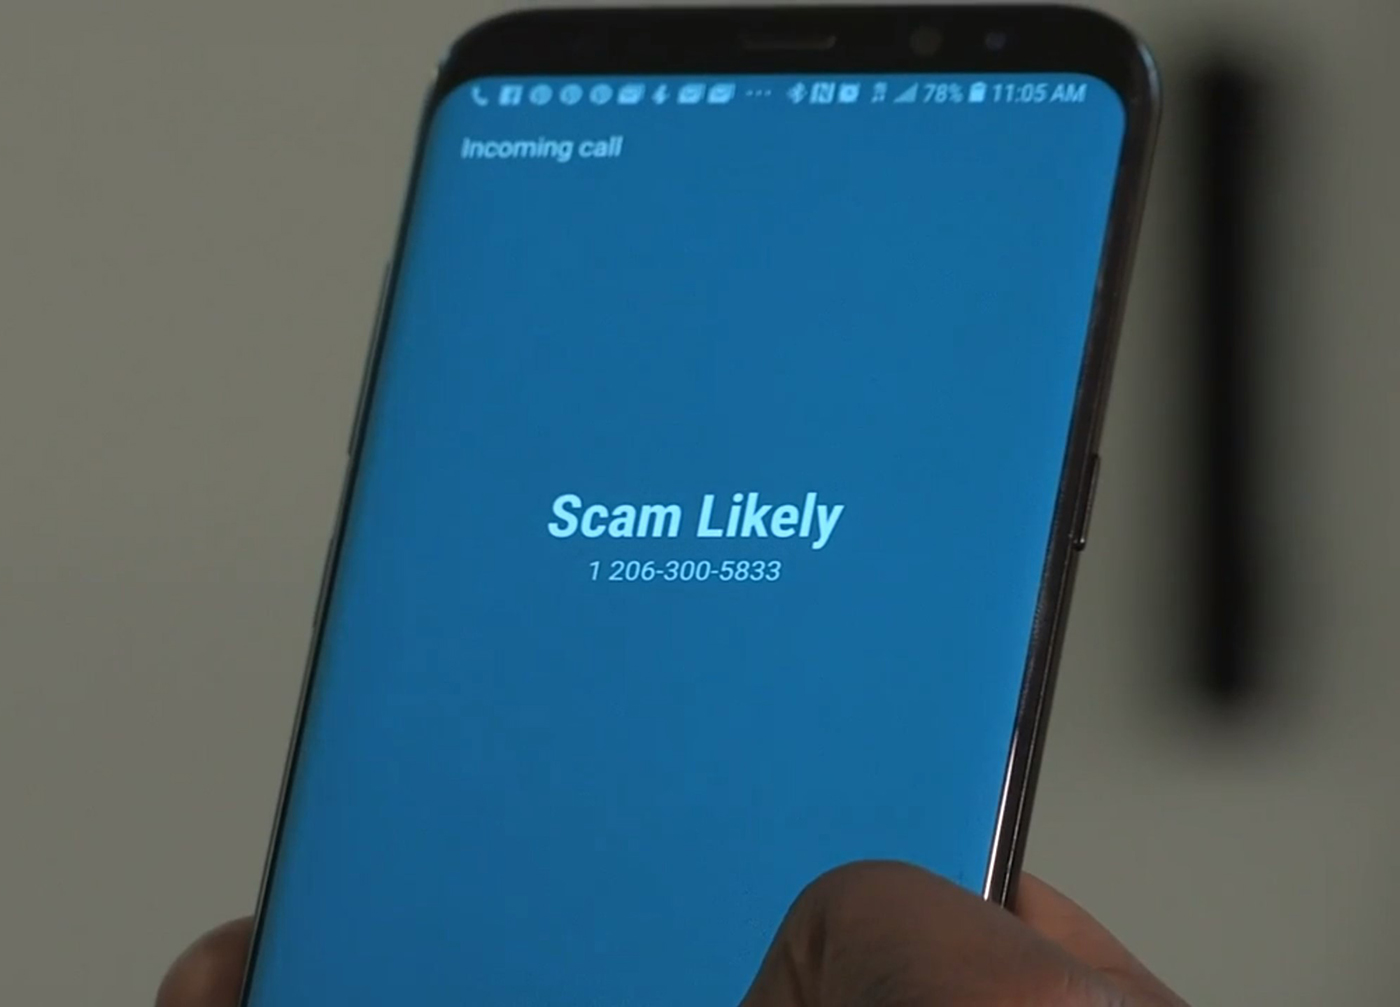 How To Block Scam Likely Calls On Android